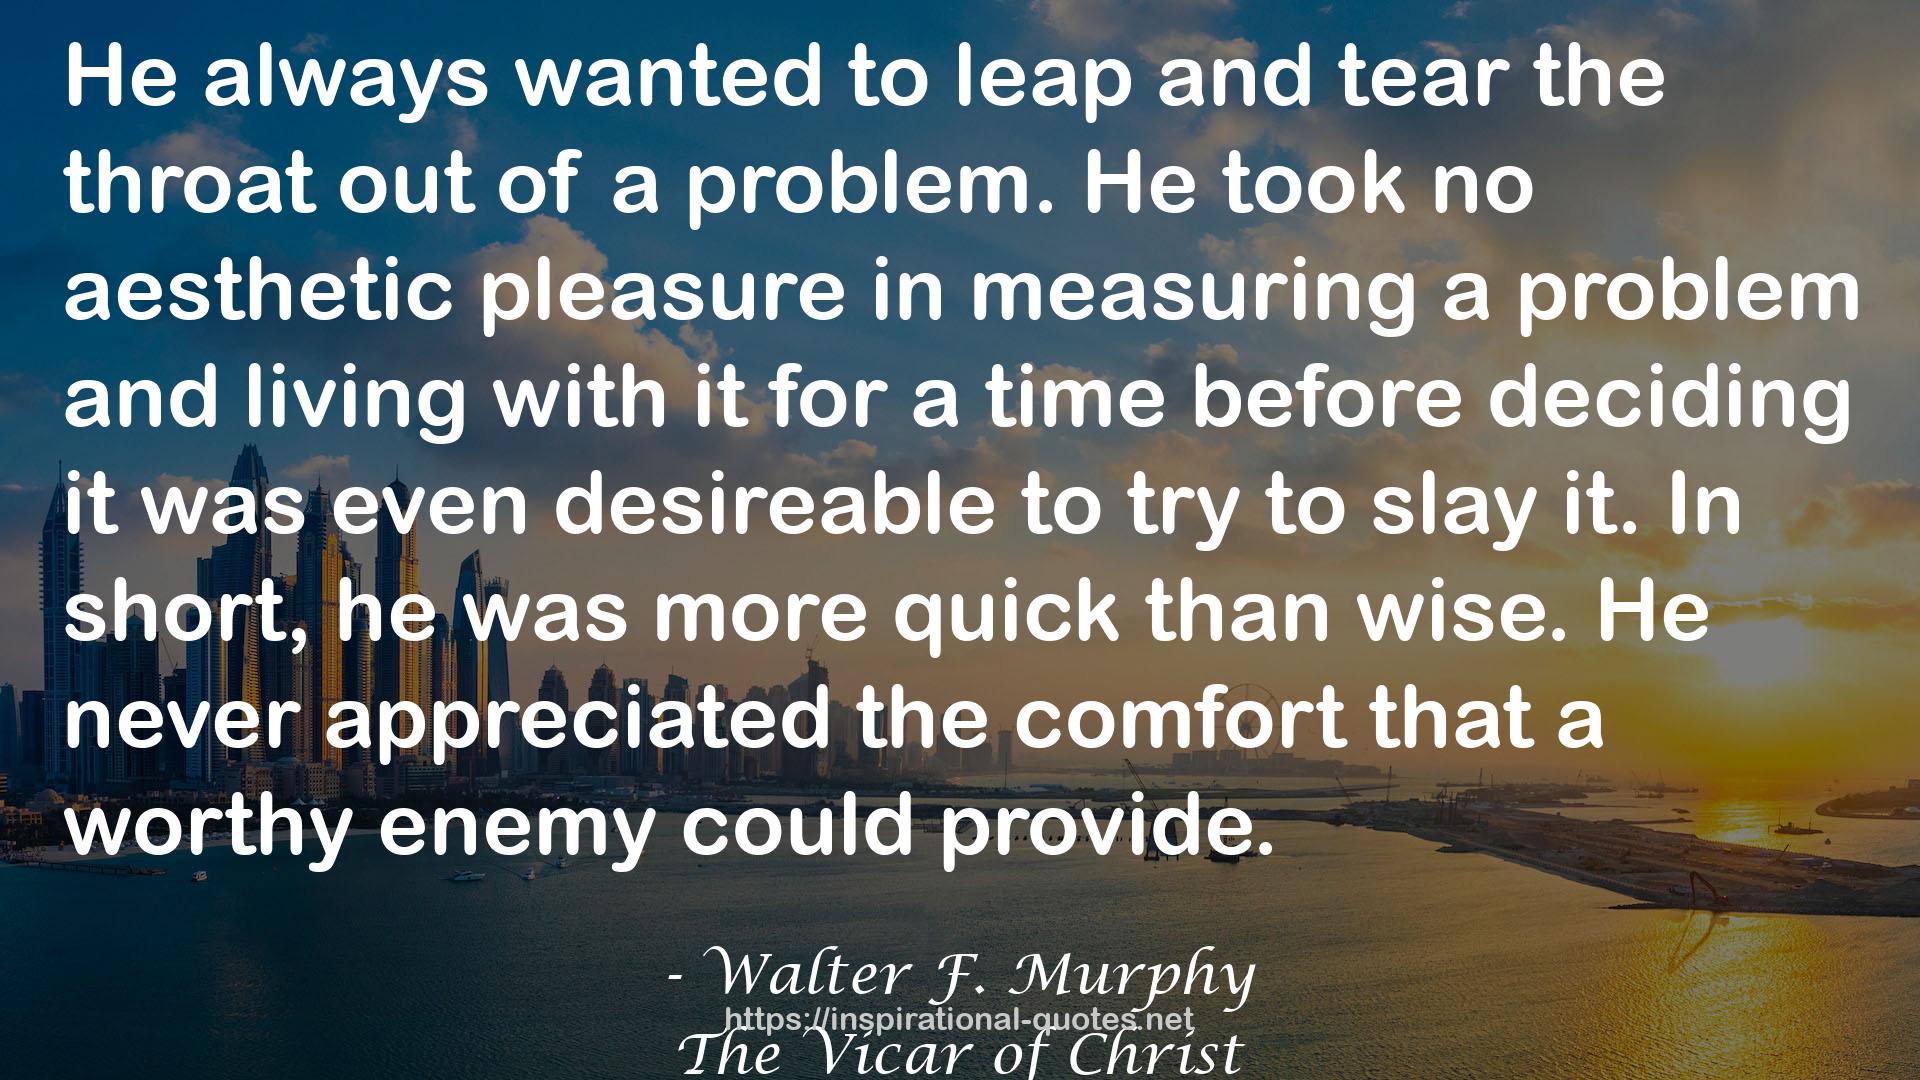 Walter F. Murphy QUOTES